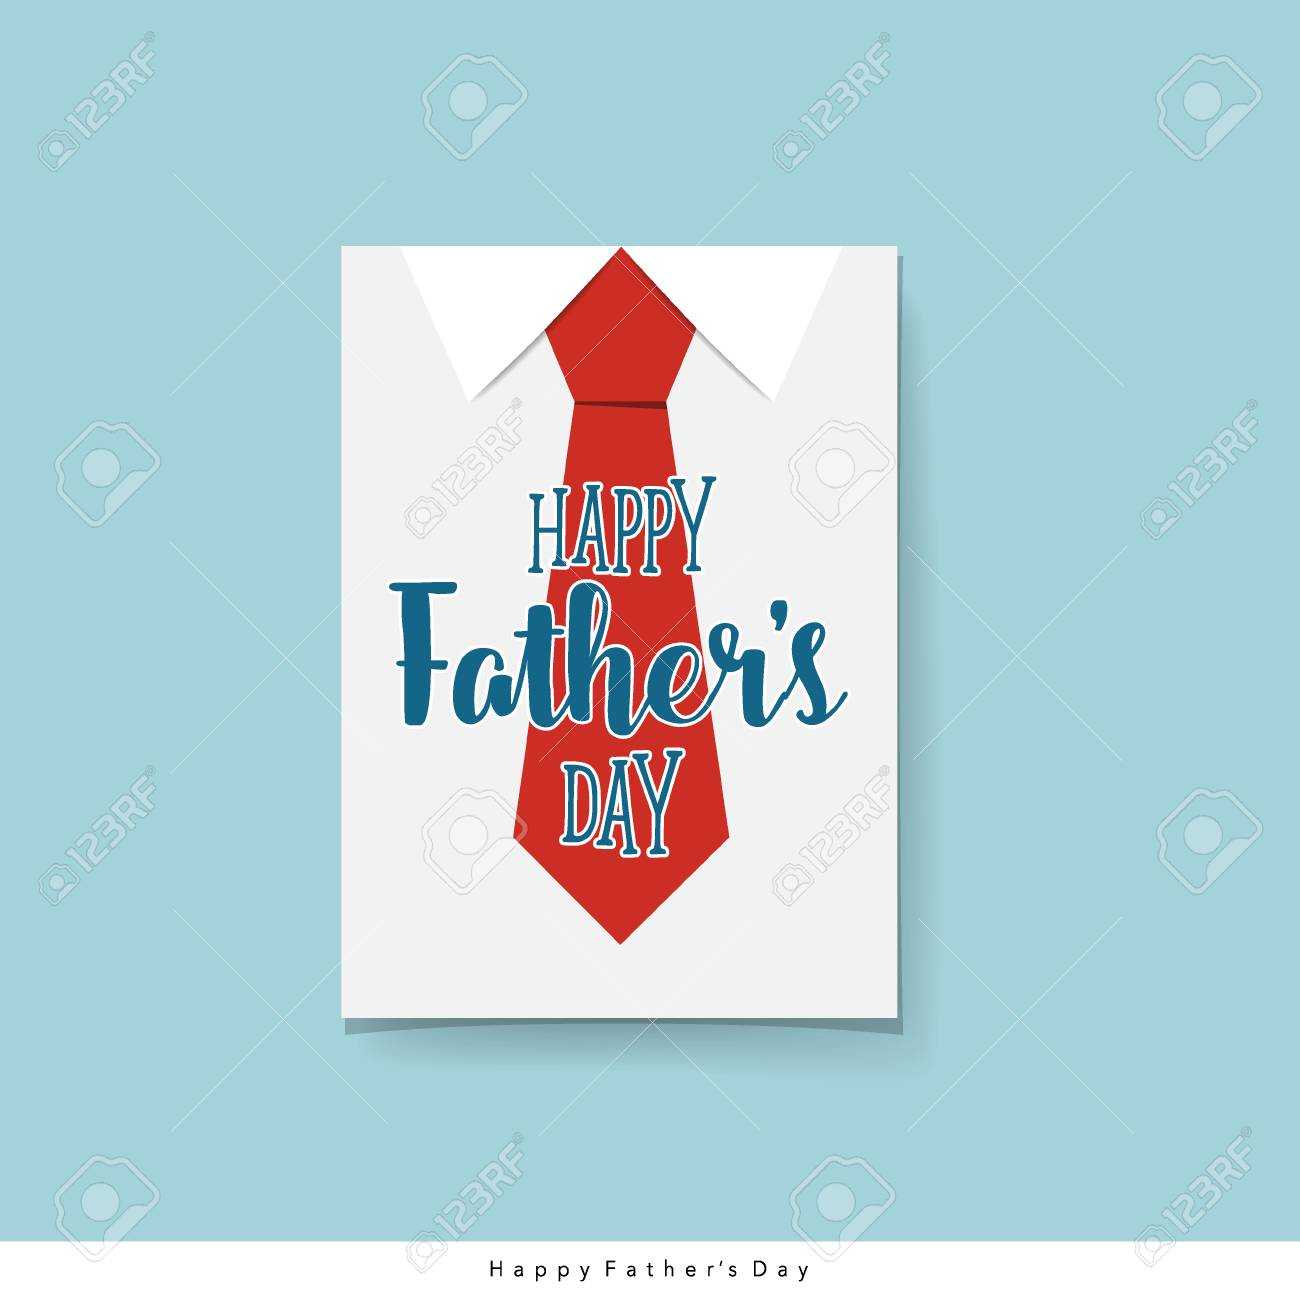 Happy Fathers Day Card Design With Big Tie. Vector Illustration. Pertaining To Fathers Day Card Template